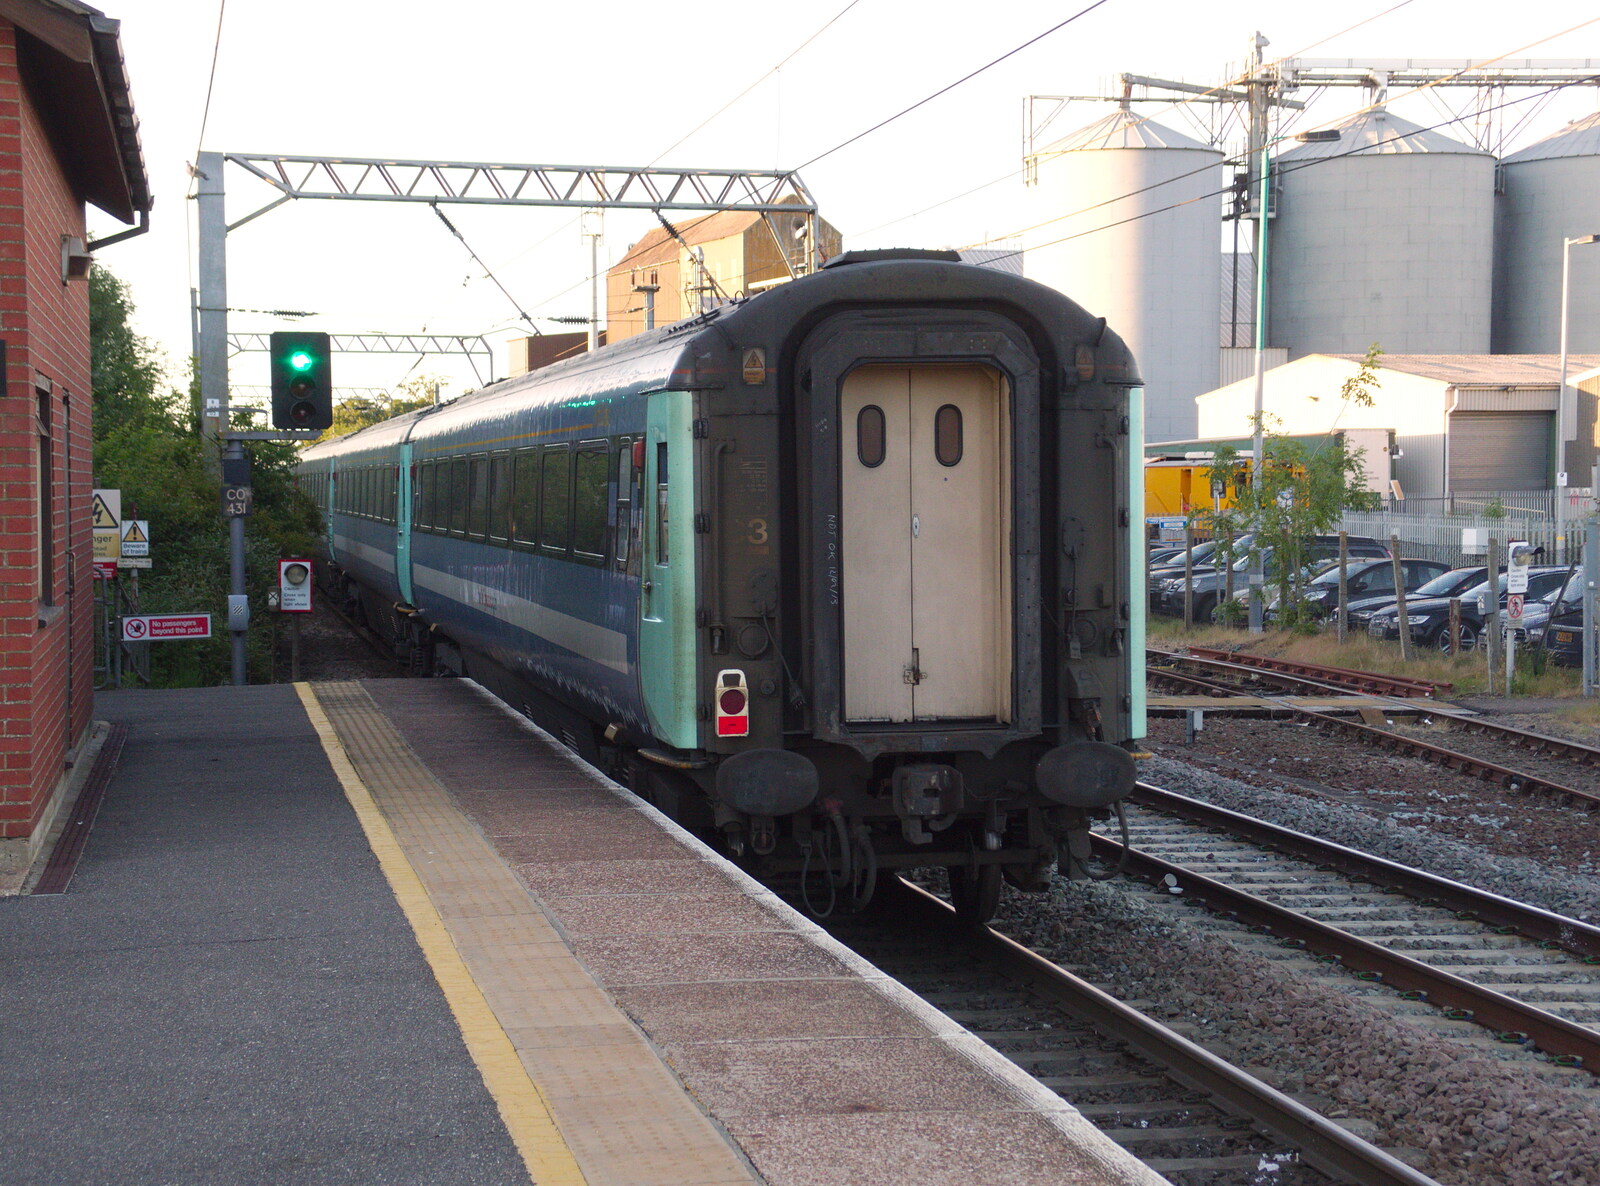 The train trundles off, with the loco missing from Railway Hell: A Pantograph Story, Chelmsford, Essex - 17th June 2014